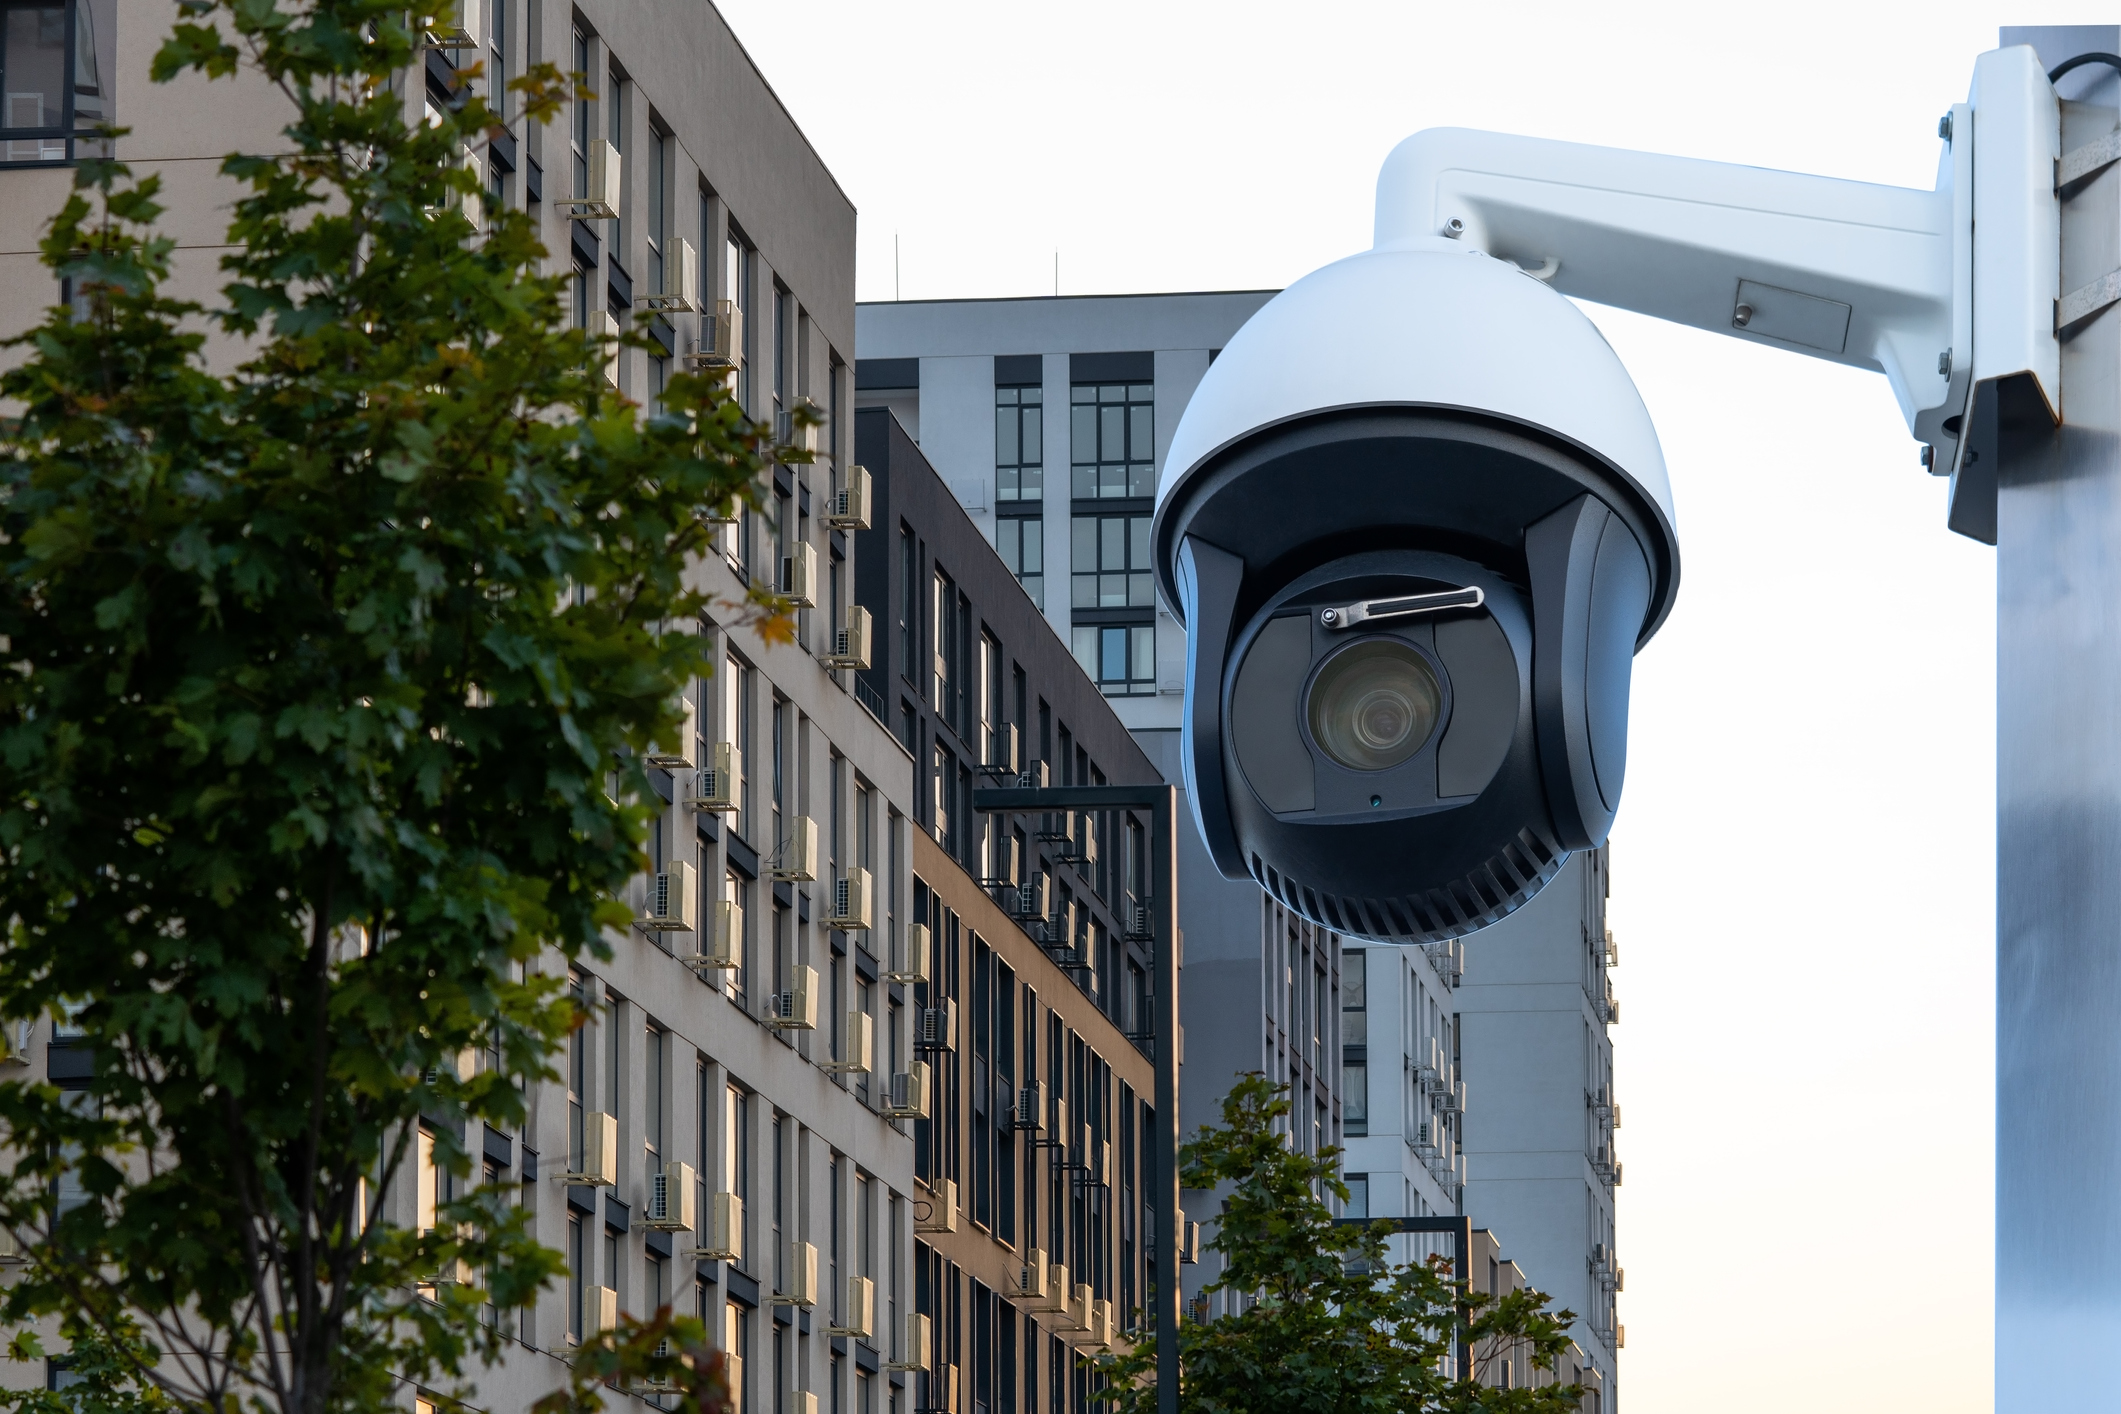 To ensure the security of the territory, a high-quality swiveling CCTV camera with night vision is installed